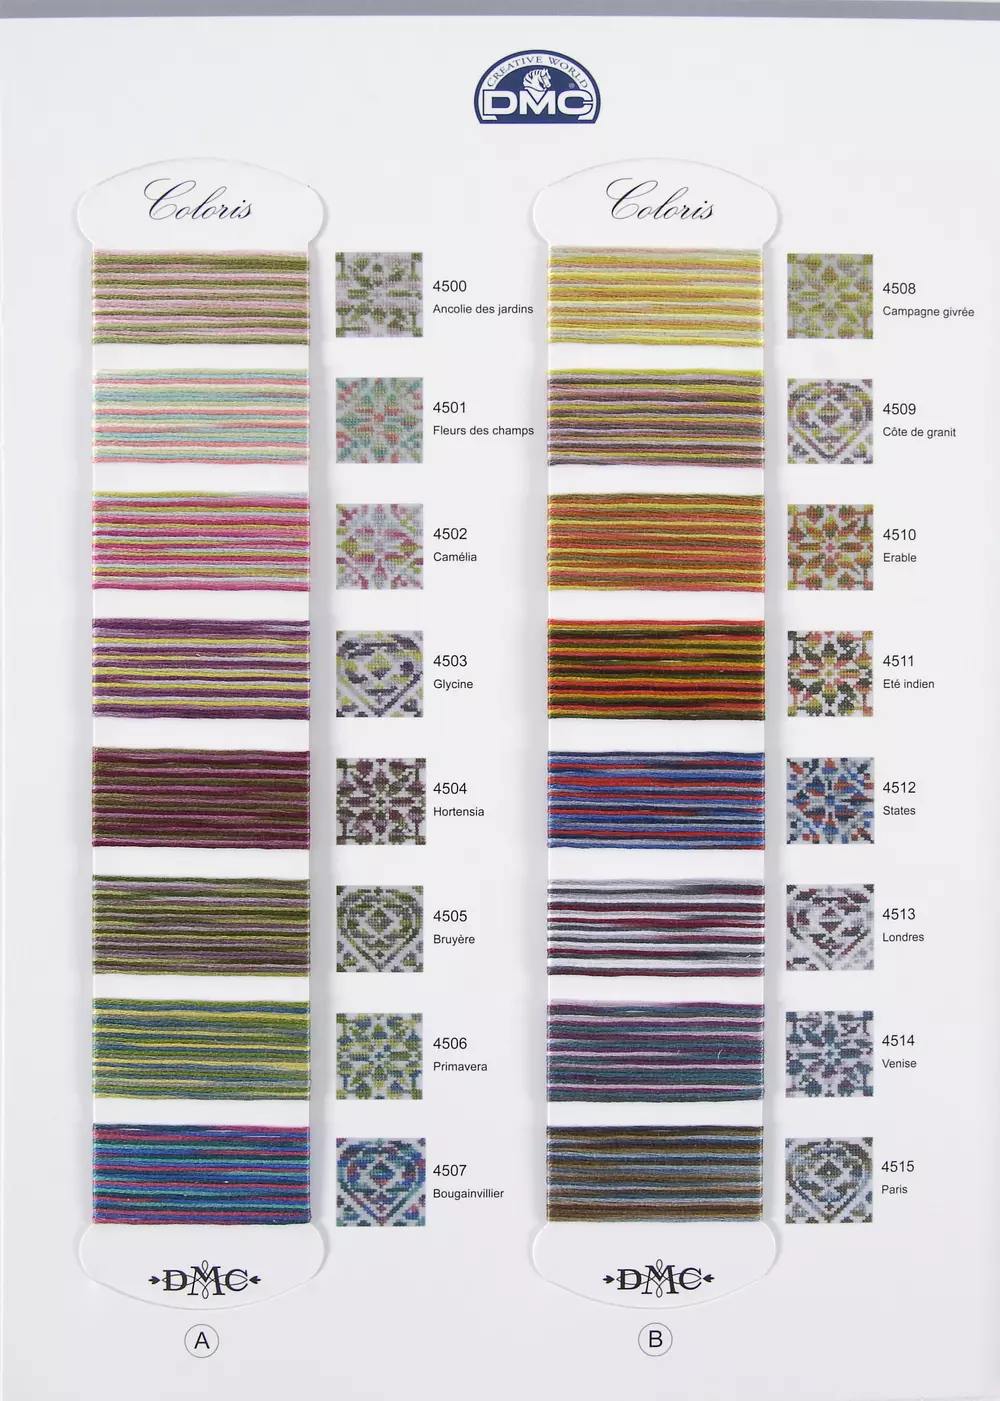 DMC Coloris Variegated Embroidery Floss 24 Color Collection 